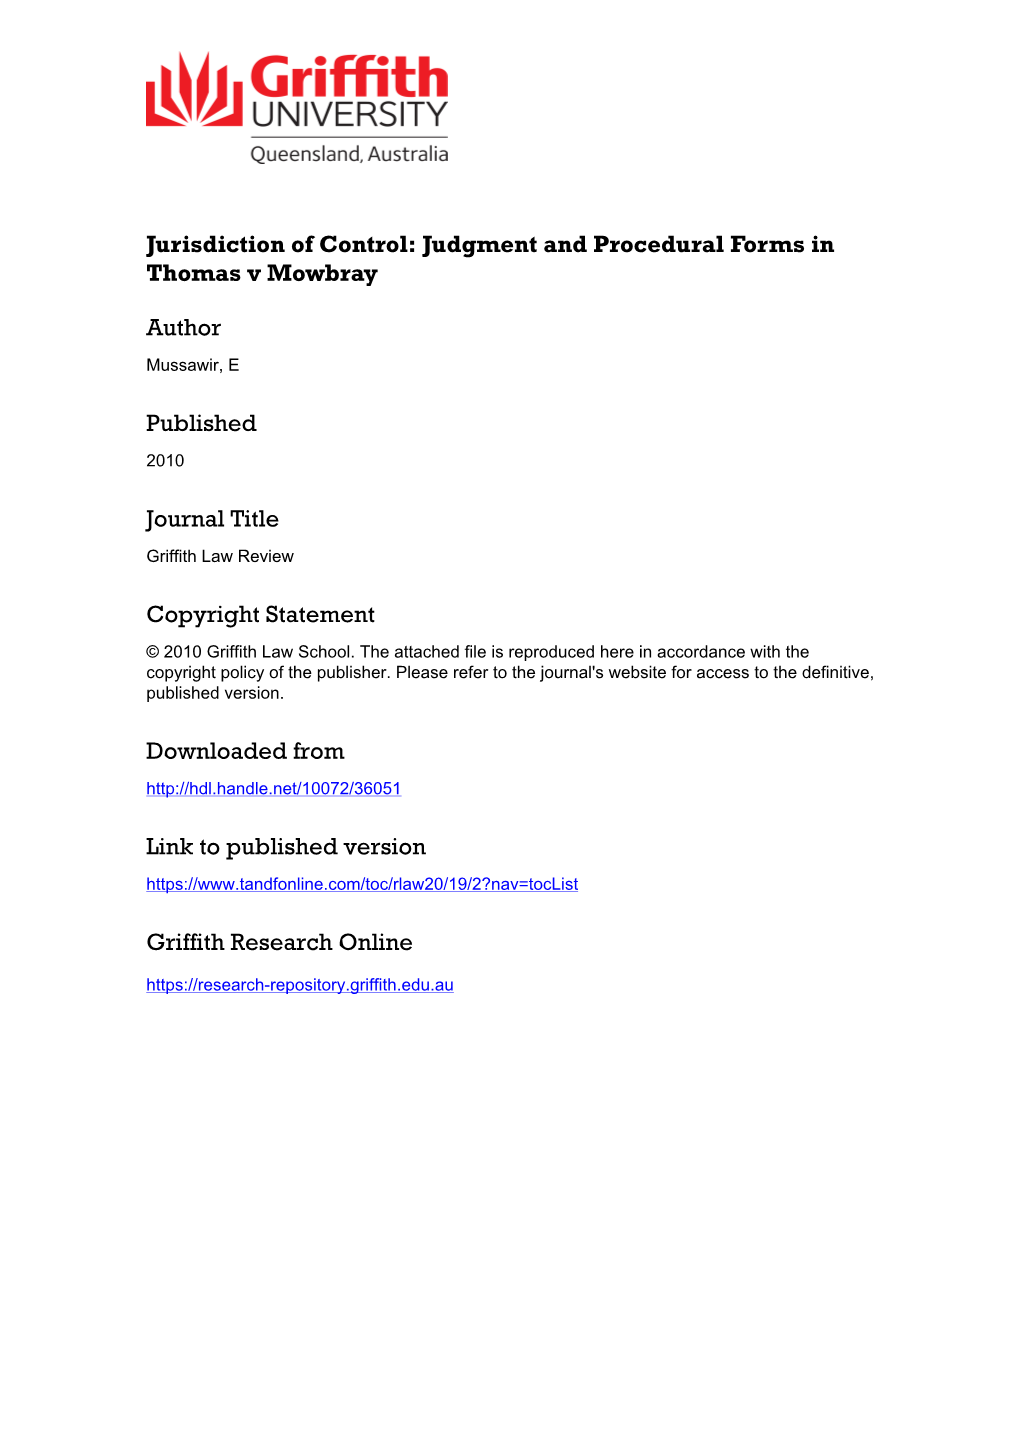 JURISDICTION of CONTROL Judgment and Procedural Forms in Thomas V Mowbray